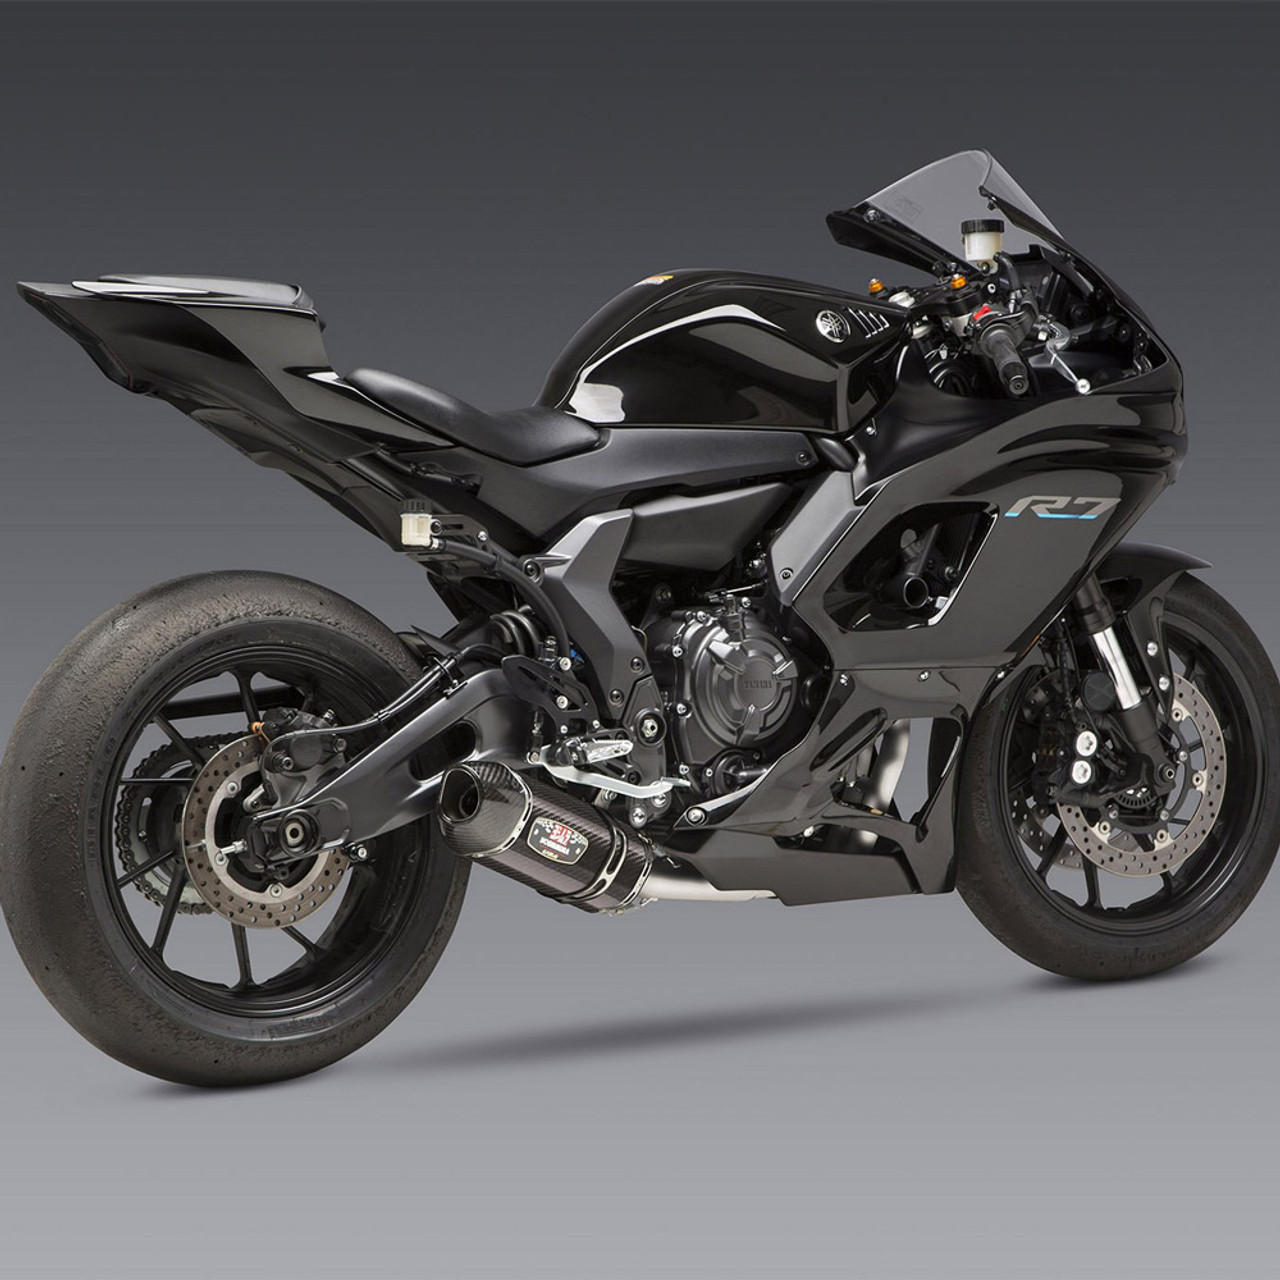 https://cdn11.bigcommerce.com/s-coxd9/images/stencil/1280x1280/products/123697/545812/yoshimura_yamaha_yzf_r7_race_r77_works_full_exhaust_system_carbon__31688.1680193809.jpg?c=2